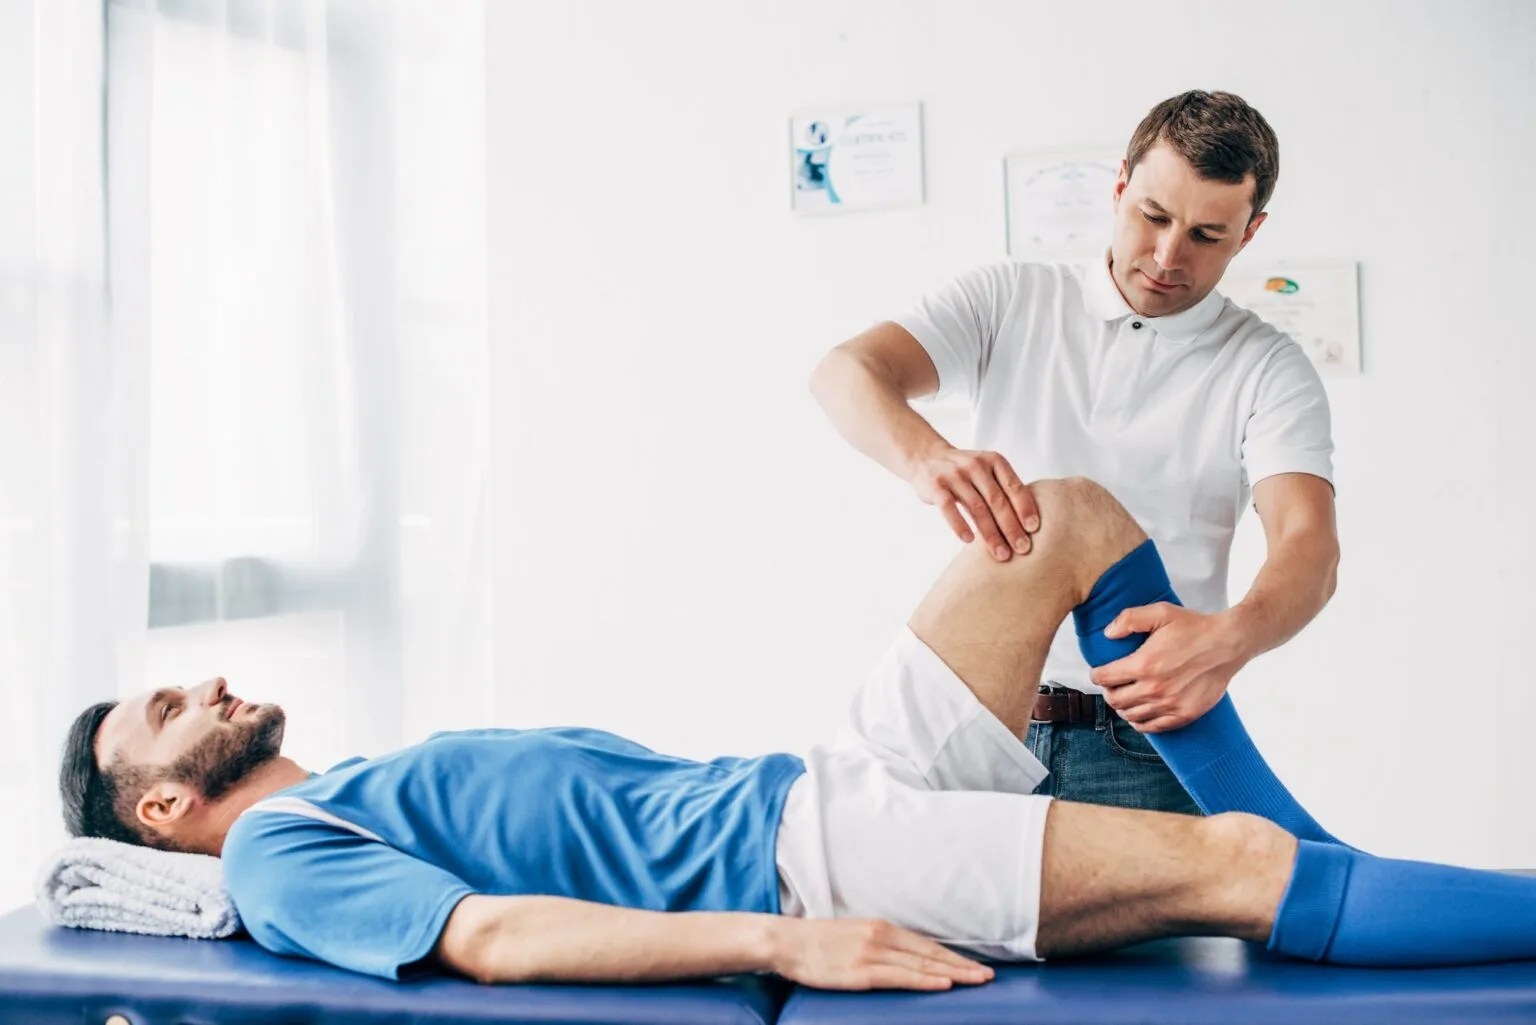 5 Conditions That Can Be Treated With Orthopedic Rehabilitation